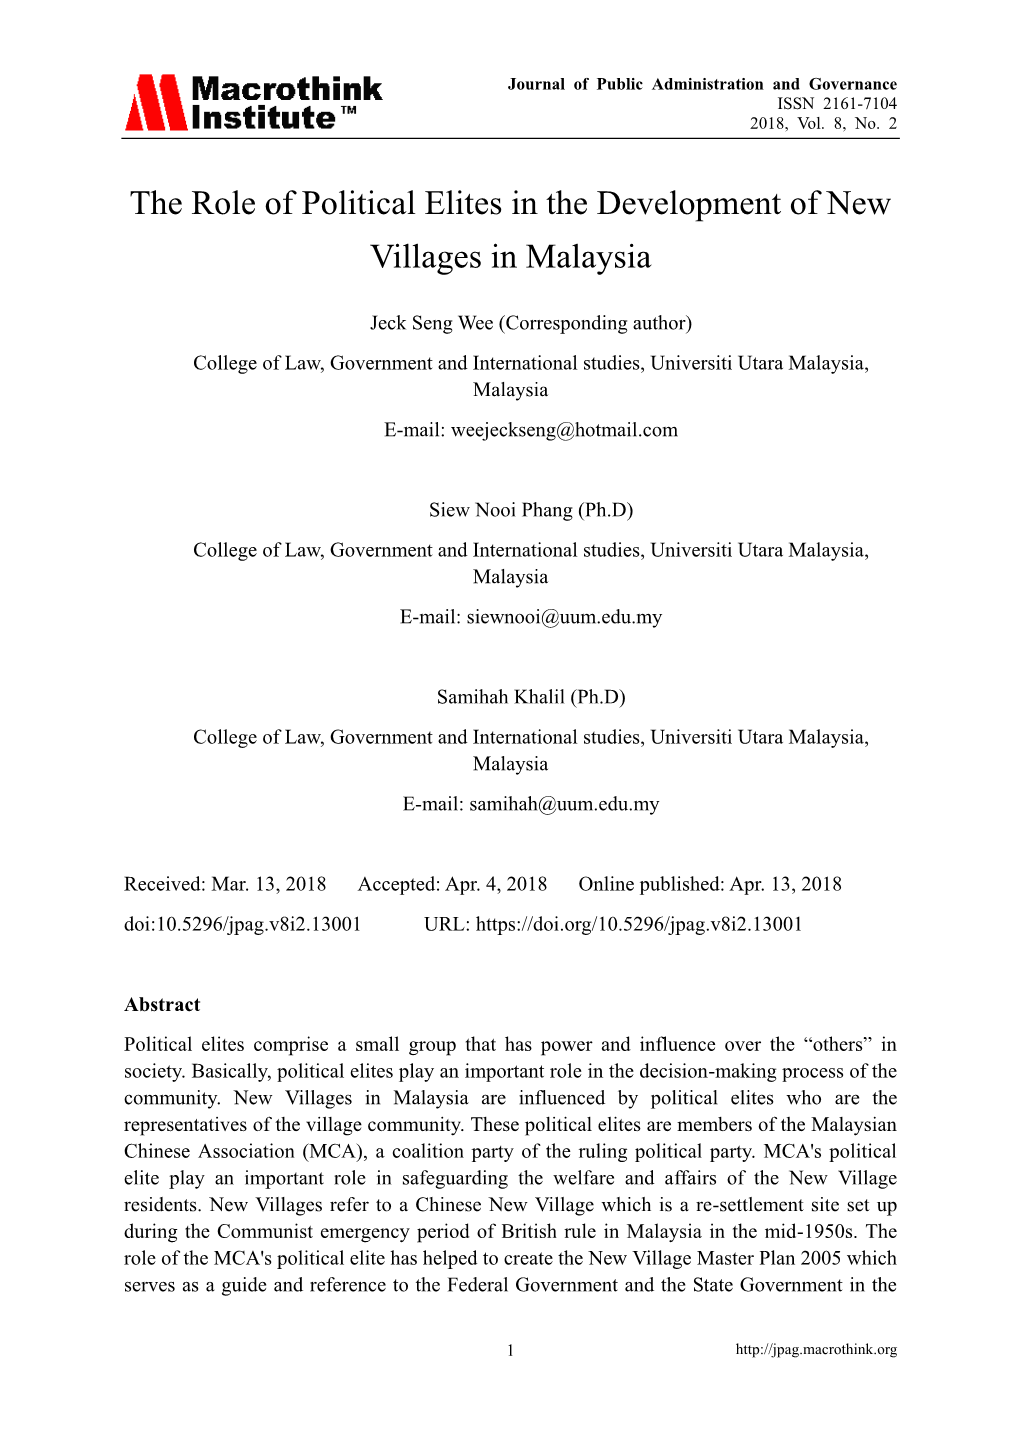 The Role of Political Elites in the Development of New Villages in Malaysia